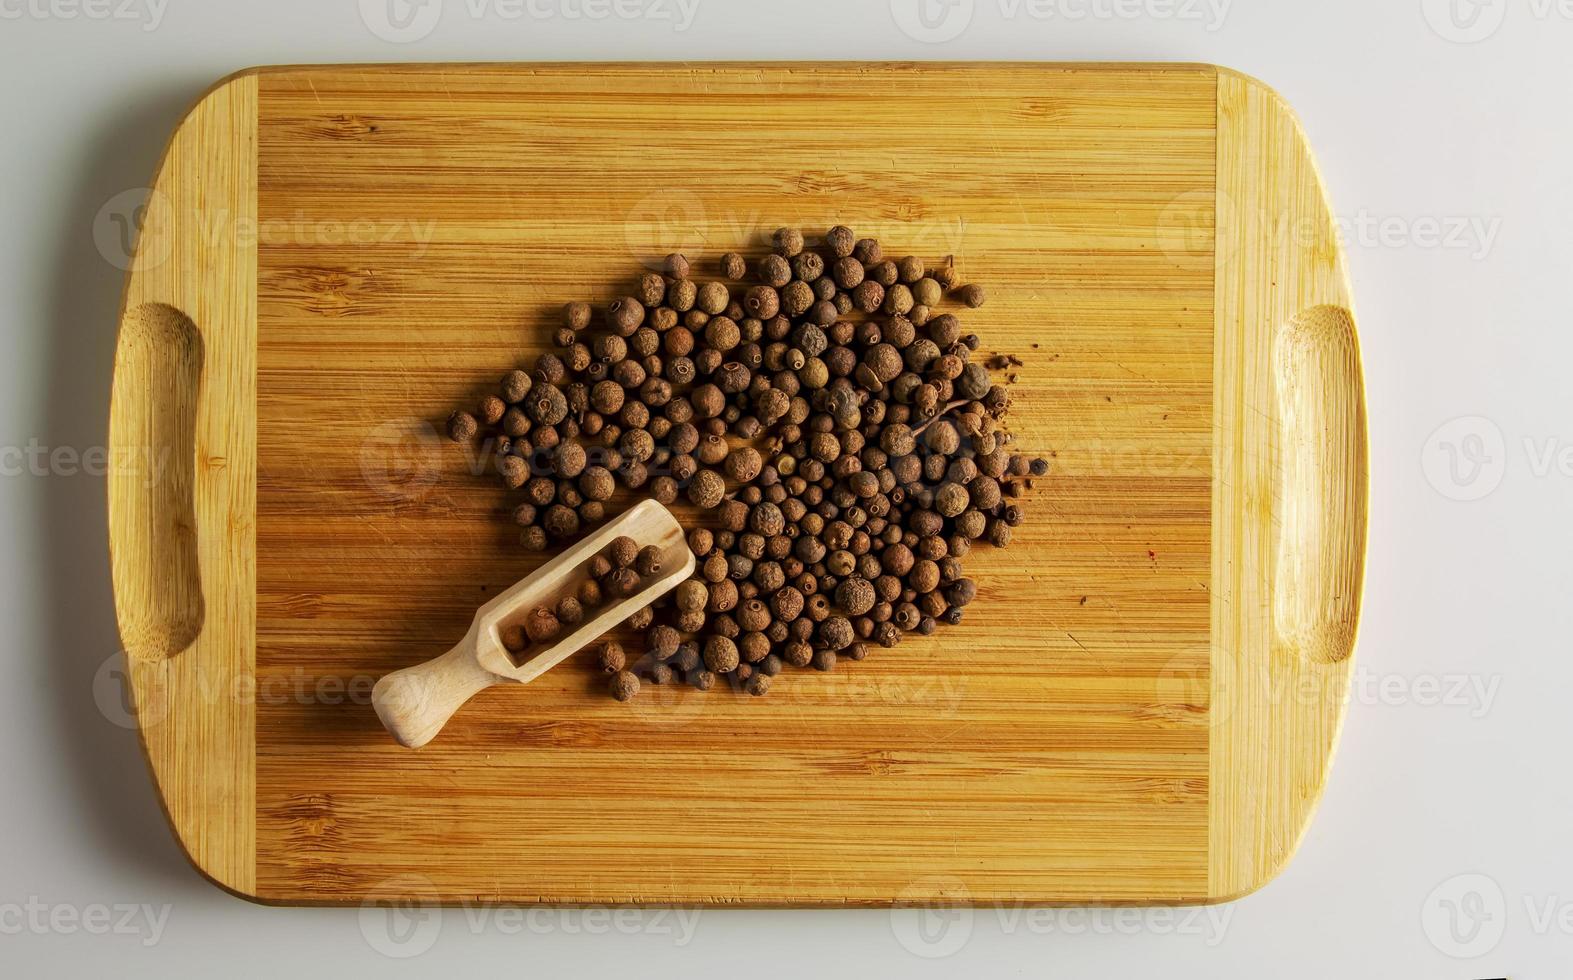 Spice allspice peas. Aromatic spice for food. Background of dried seeds allspice peas on a wooden kitchen board with a measuring spoon. photo